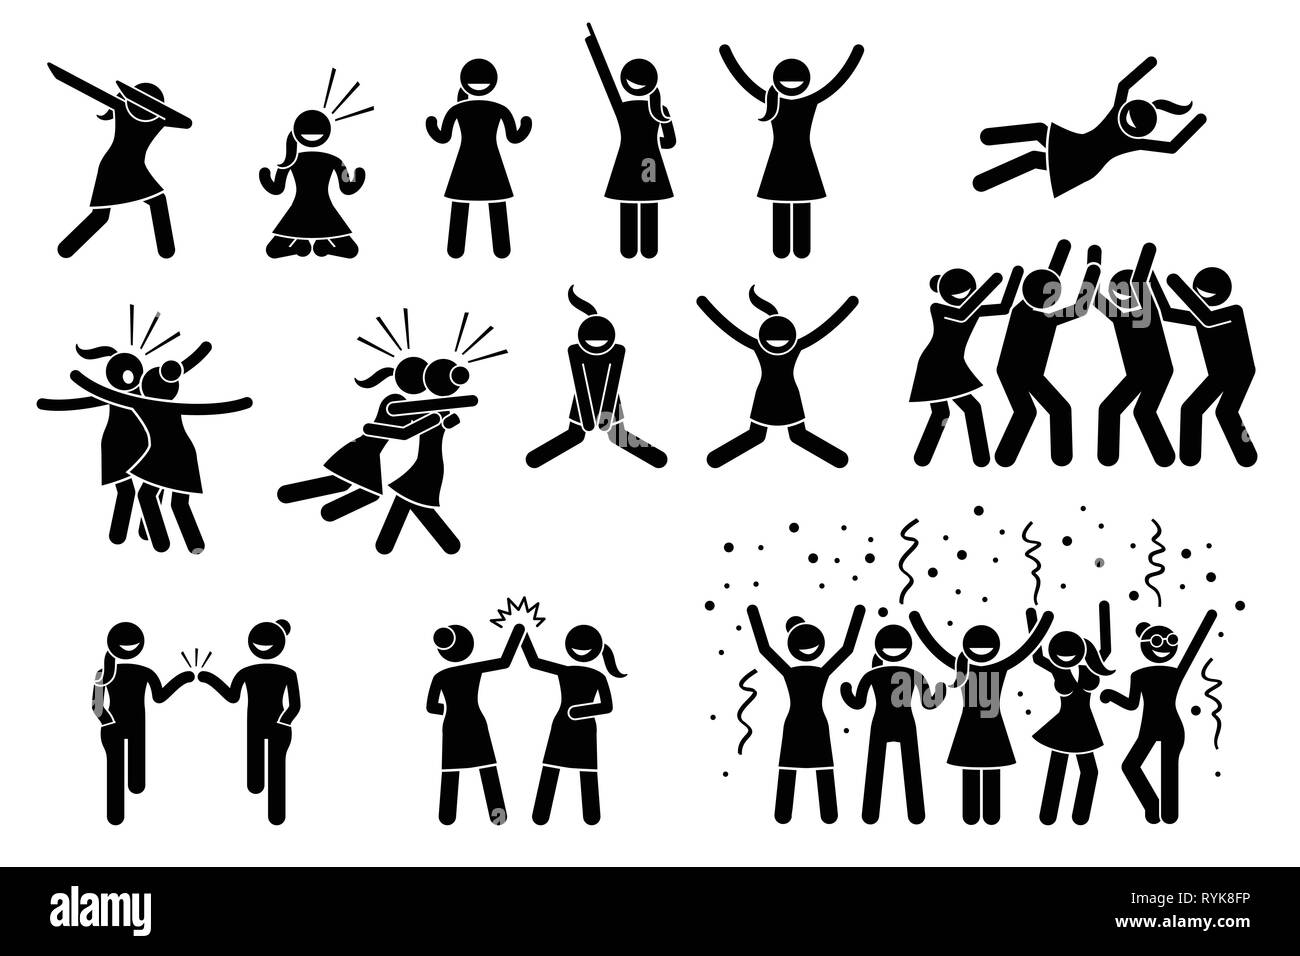 Female, girl, or woman celebration poses and gestures. Artwork shows girl celebrating by dabbing, raising hands, jumping up, hug, chest bump, high fiv Stock Vector